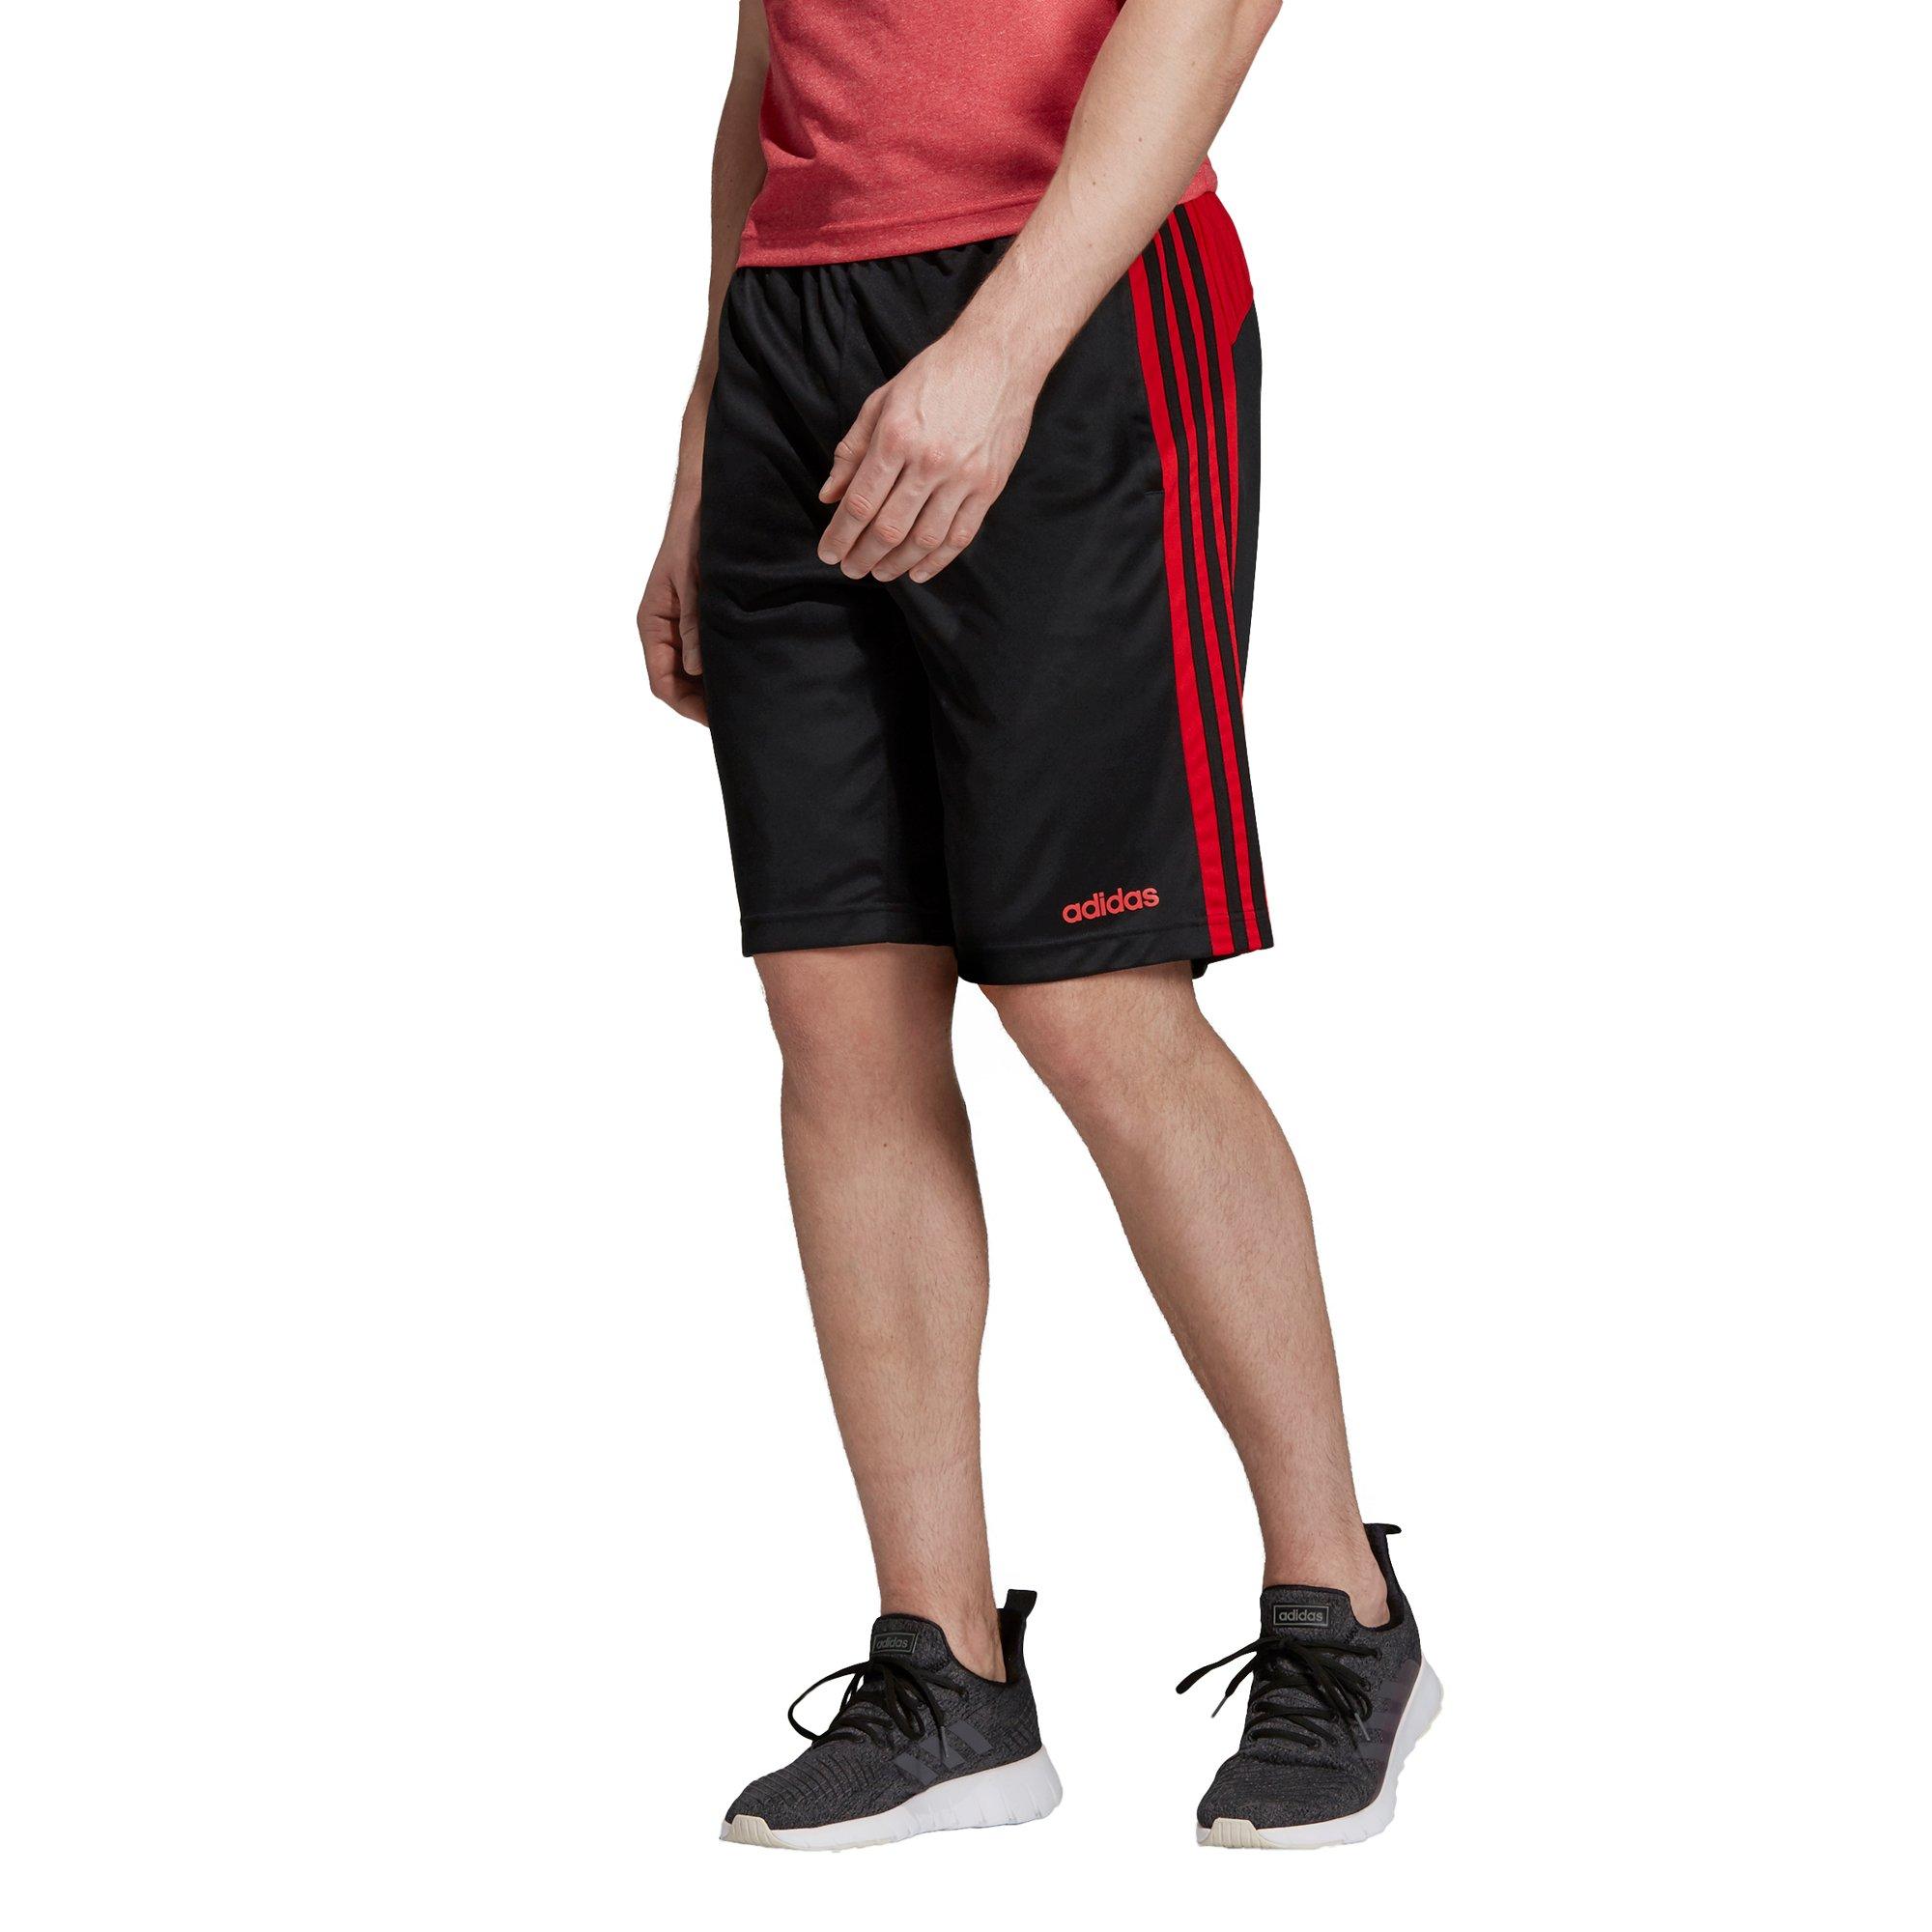 black adidas shorts with red stripes